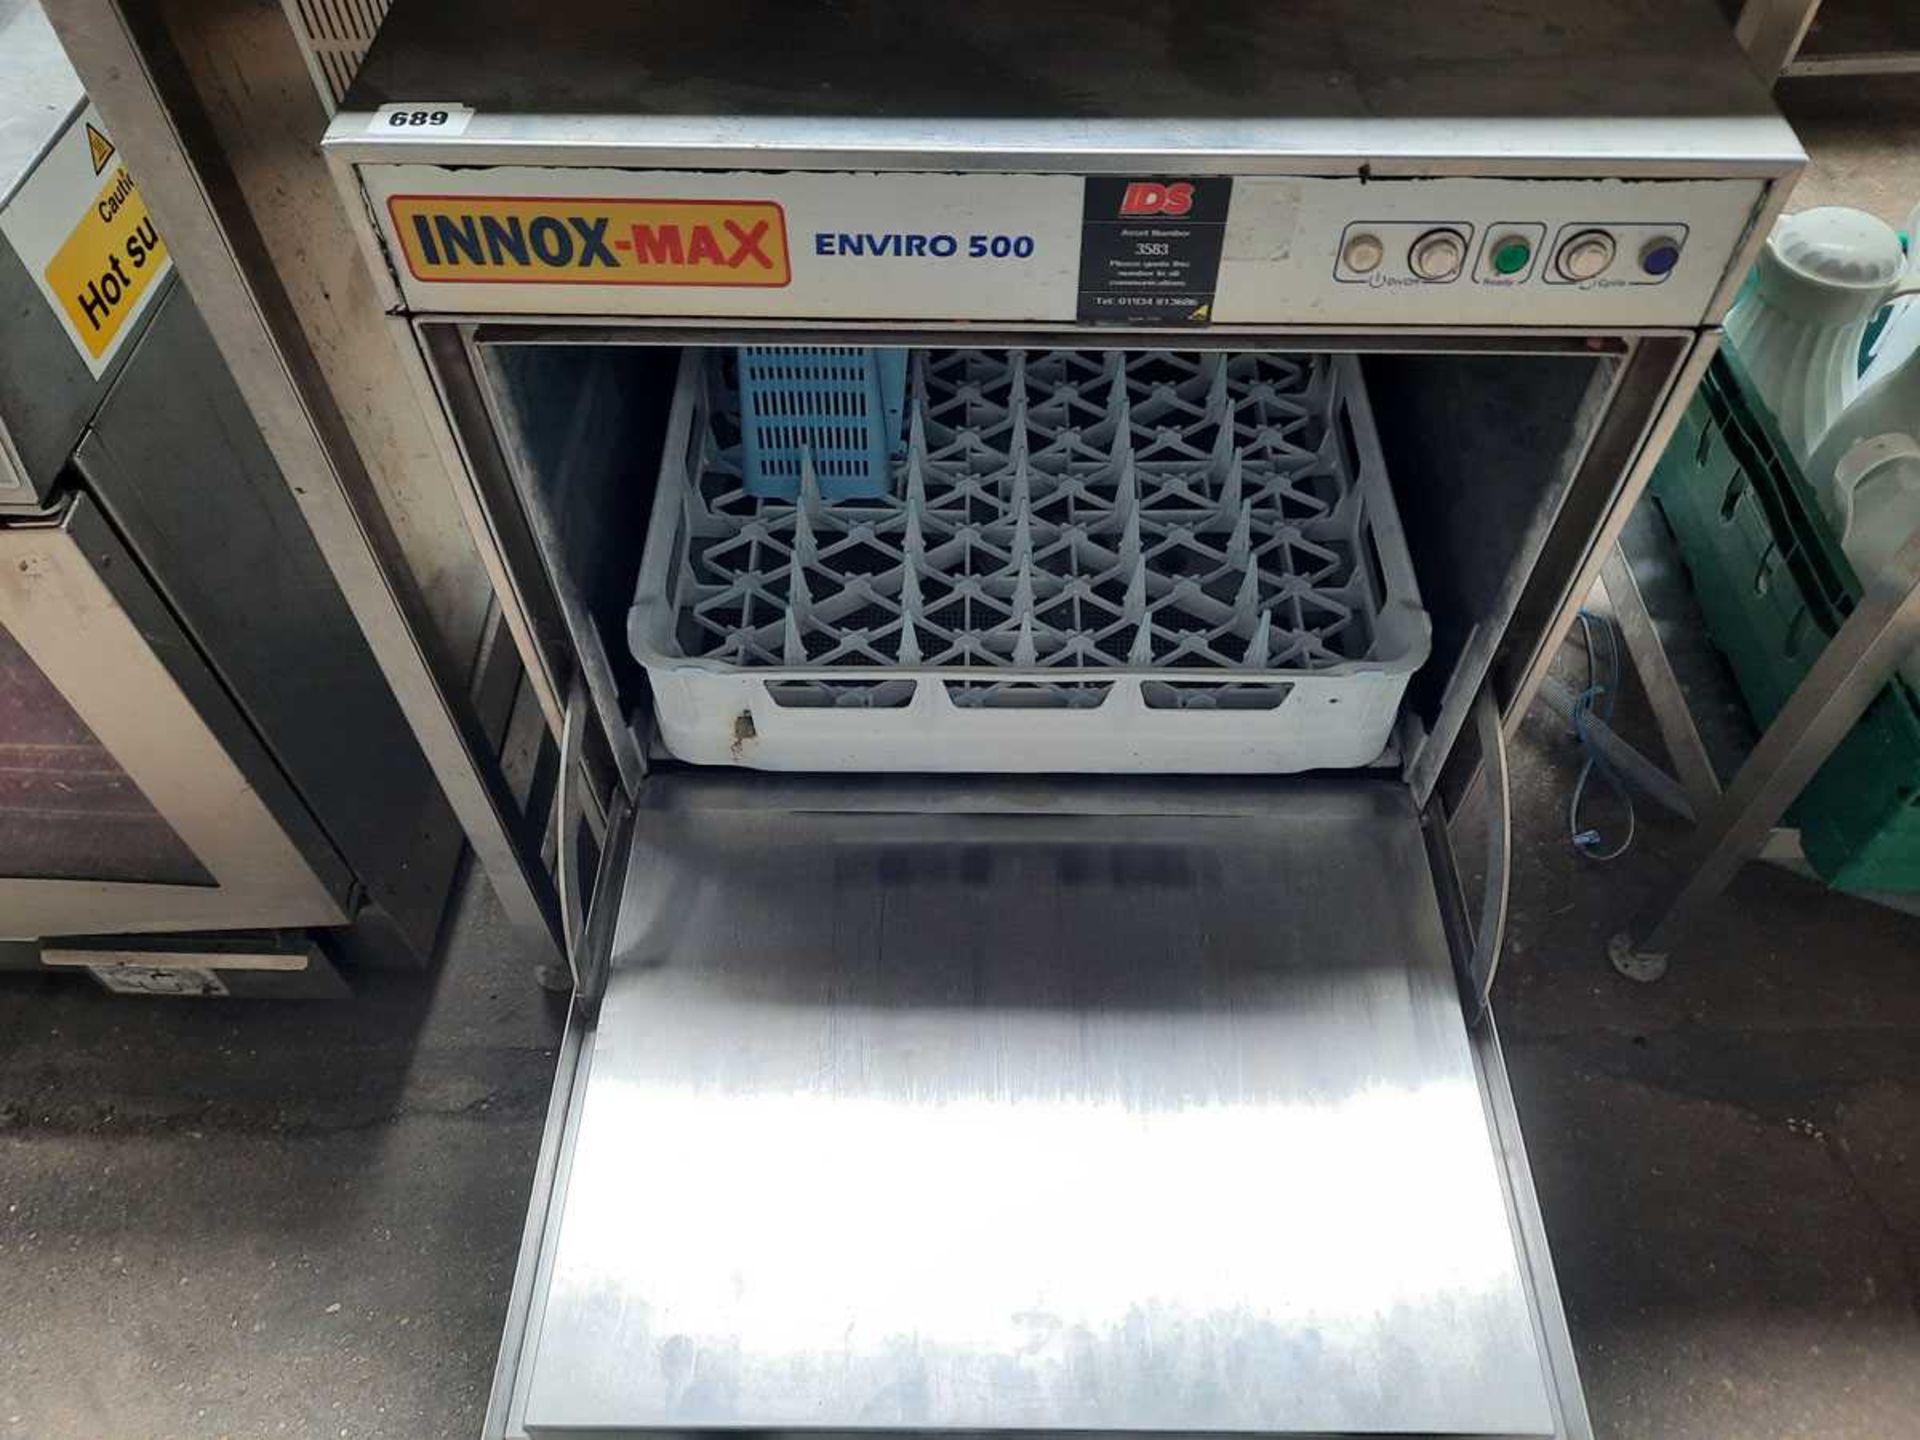 57cm Innox-Max Enviro 500 undercounter drop front washer - Image 2 of 2